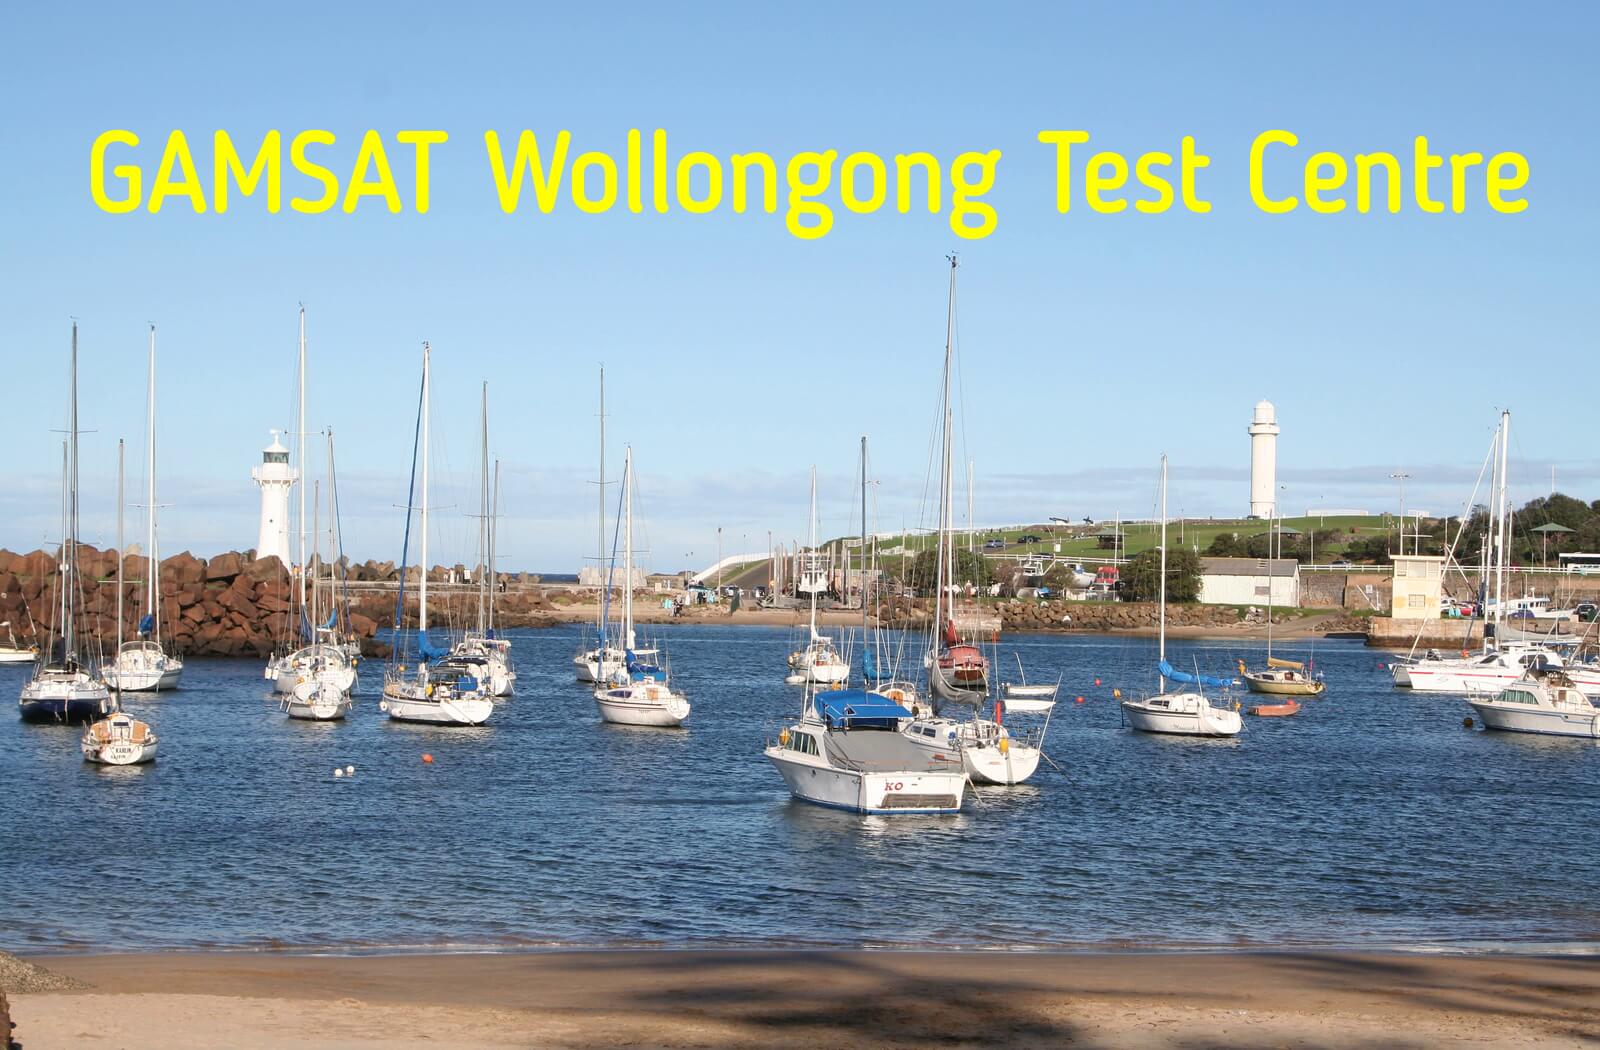 Where is GAMSAT held in Wollongong?